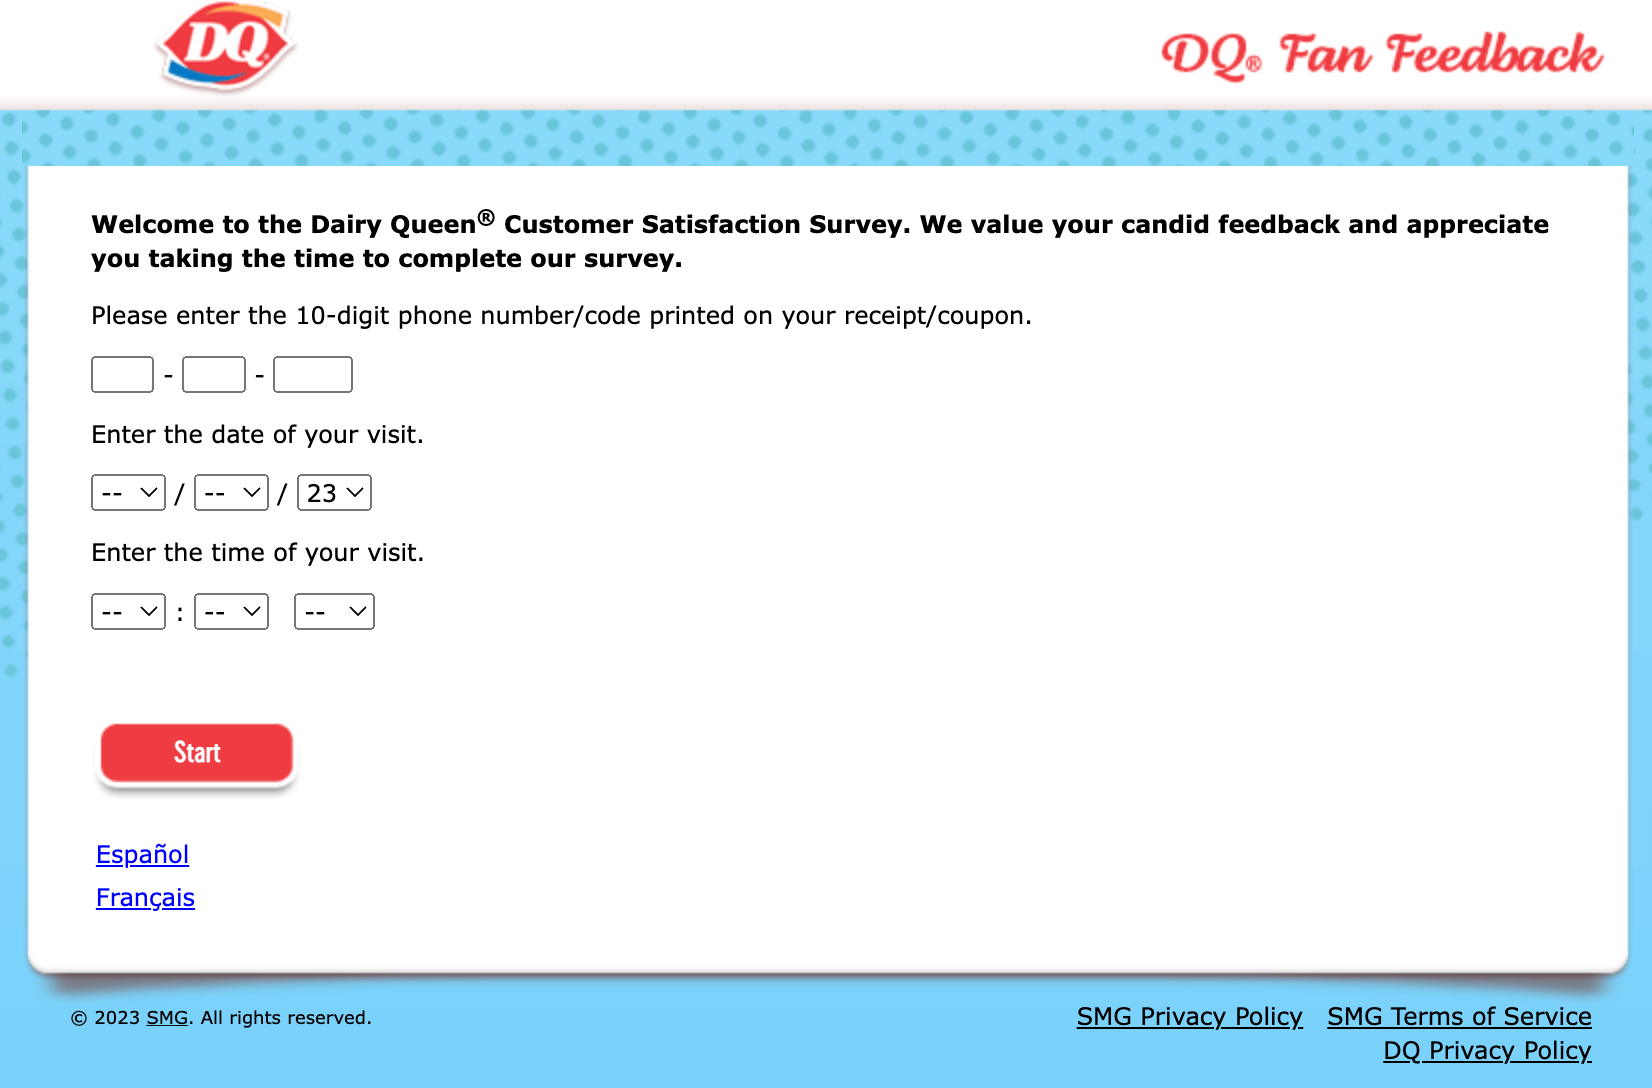 How to Participate in Dairy Queen Customer Feedback Survey at DQFanFeedback.com?